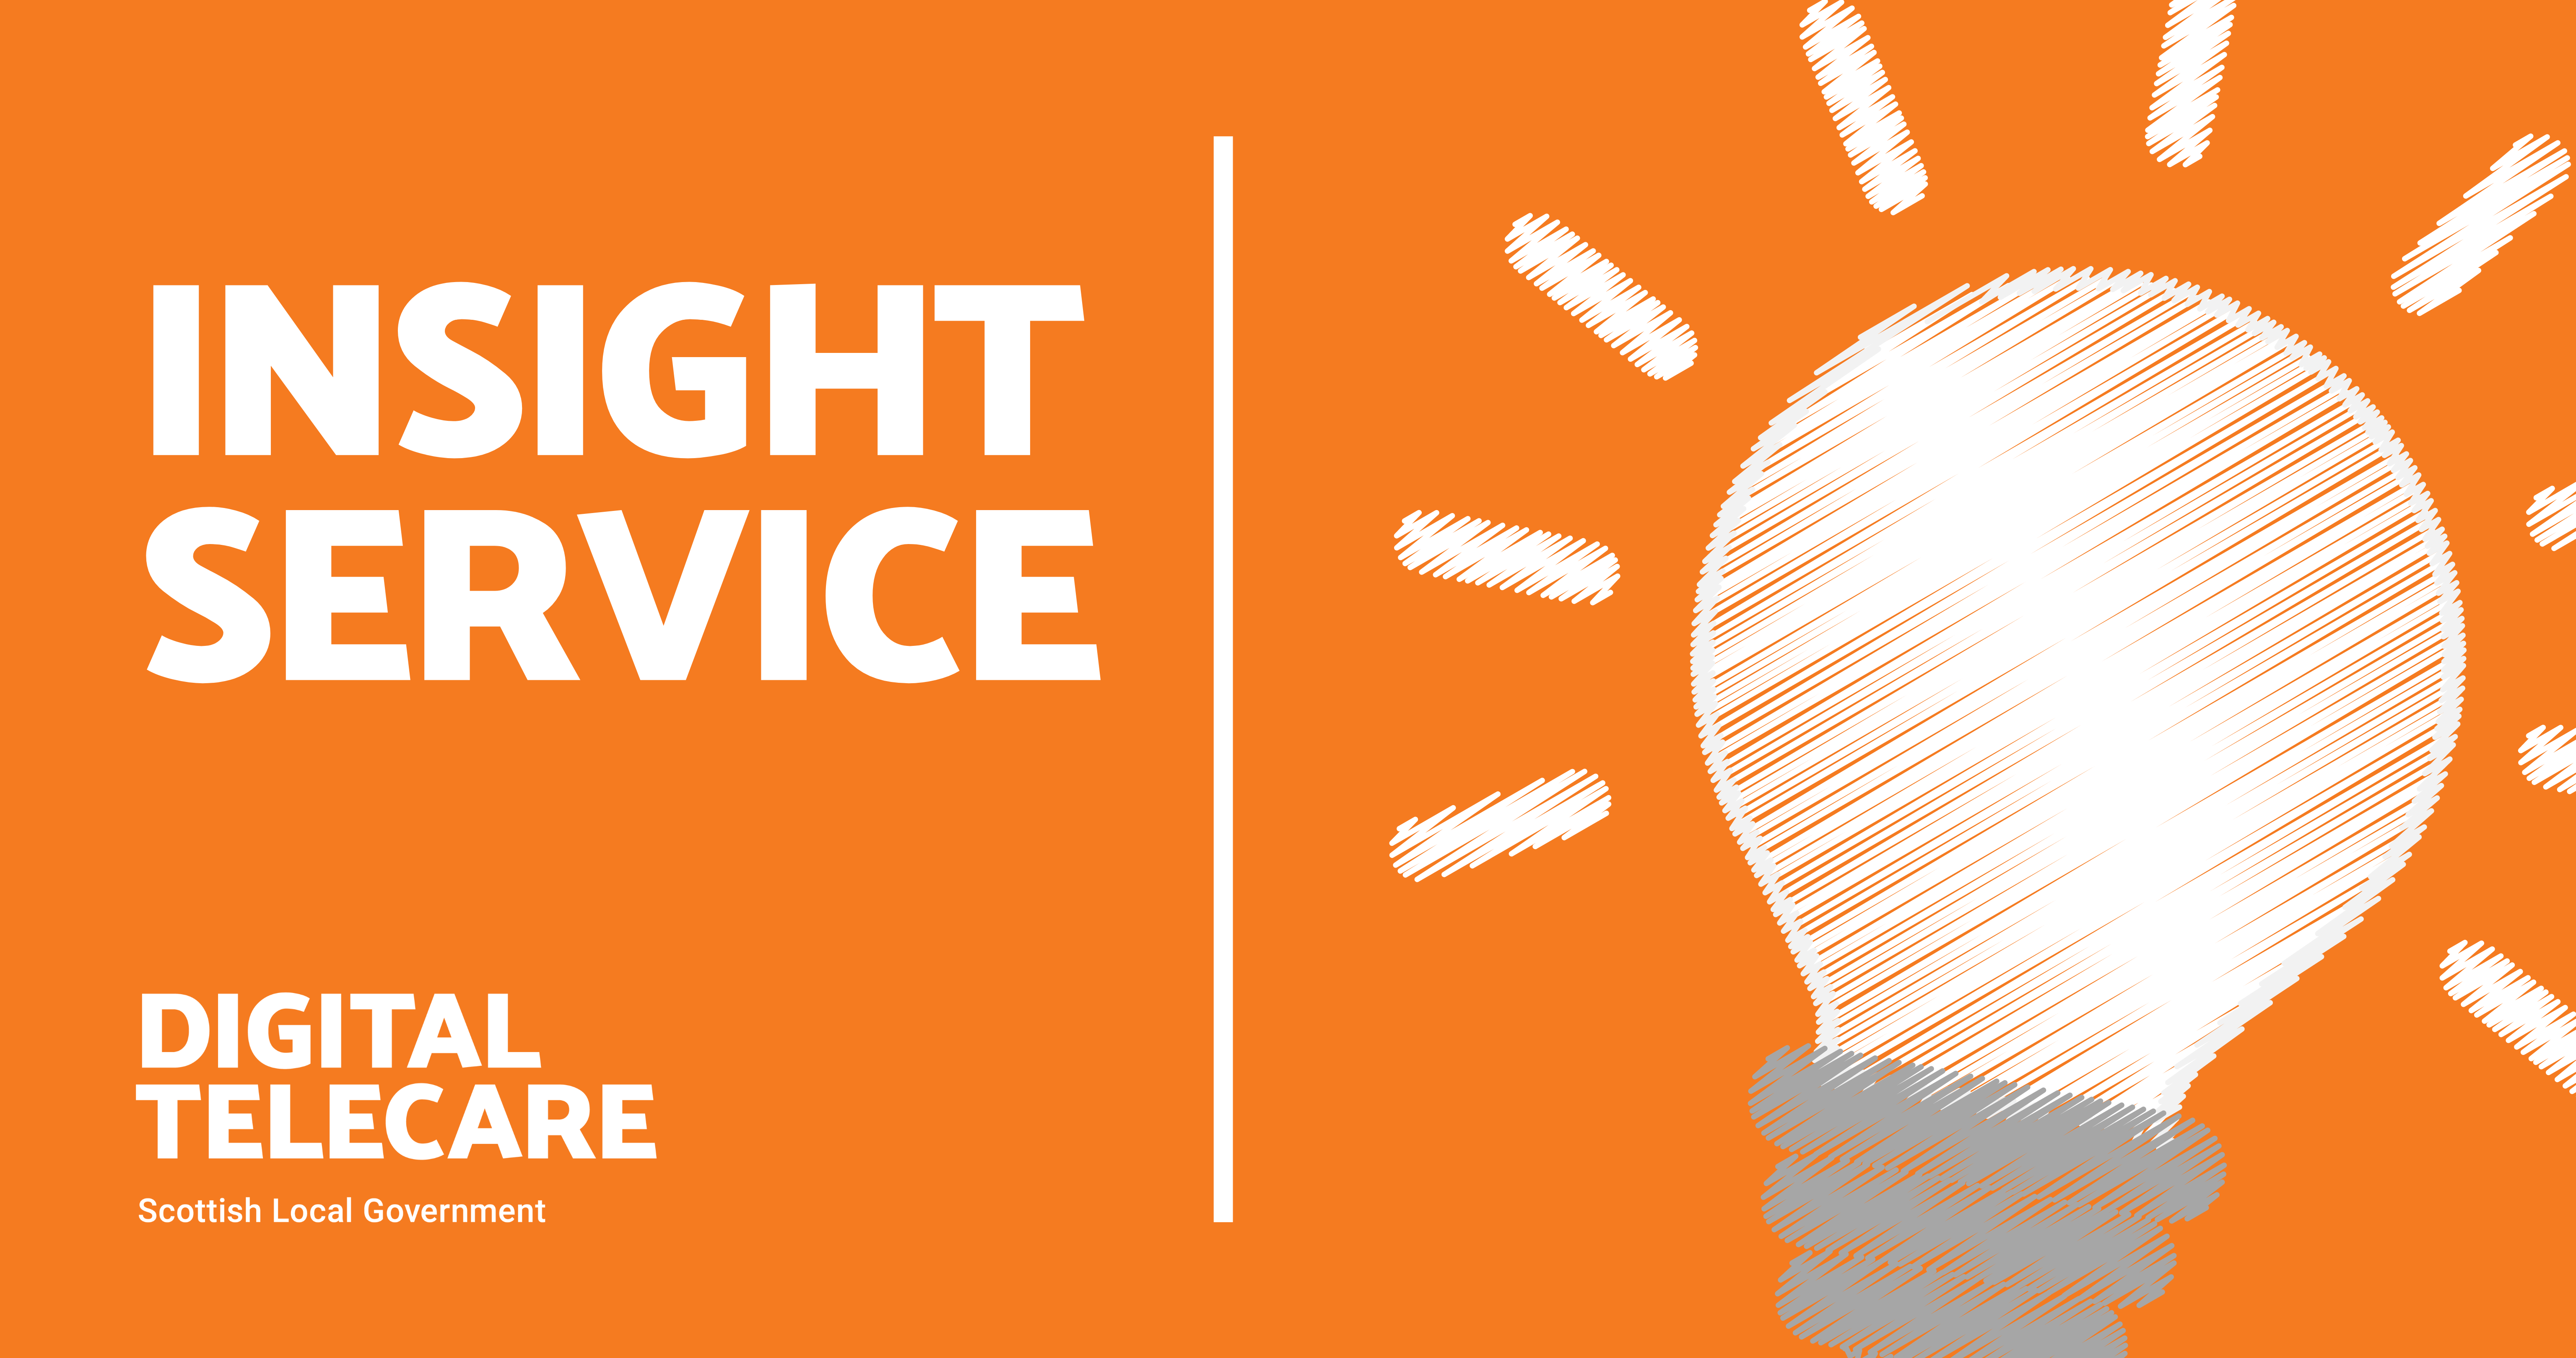  INSIGHT SERVICE MAY 2020: OPERATIONAL PROCEDURES 